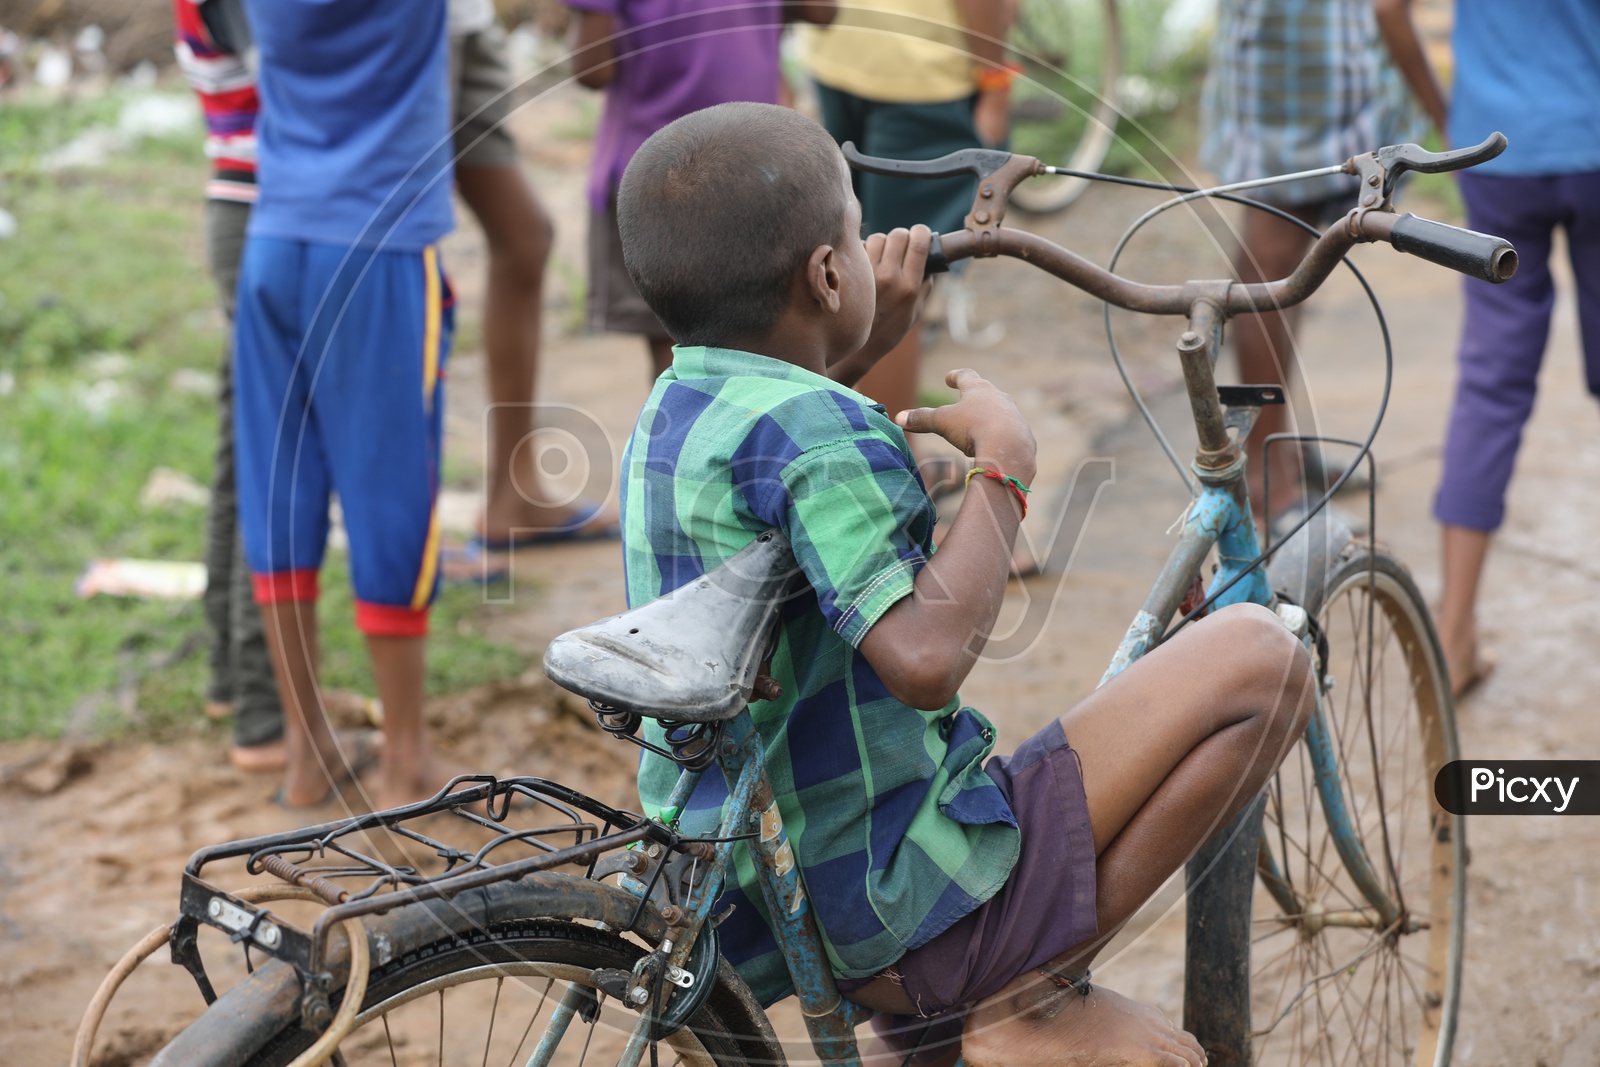 Indian Kid sitting on a bicycle